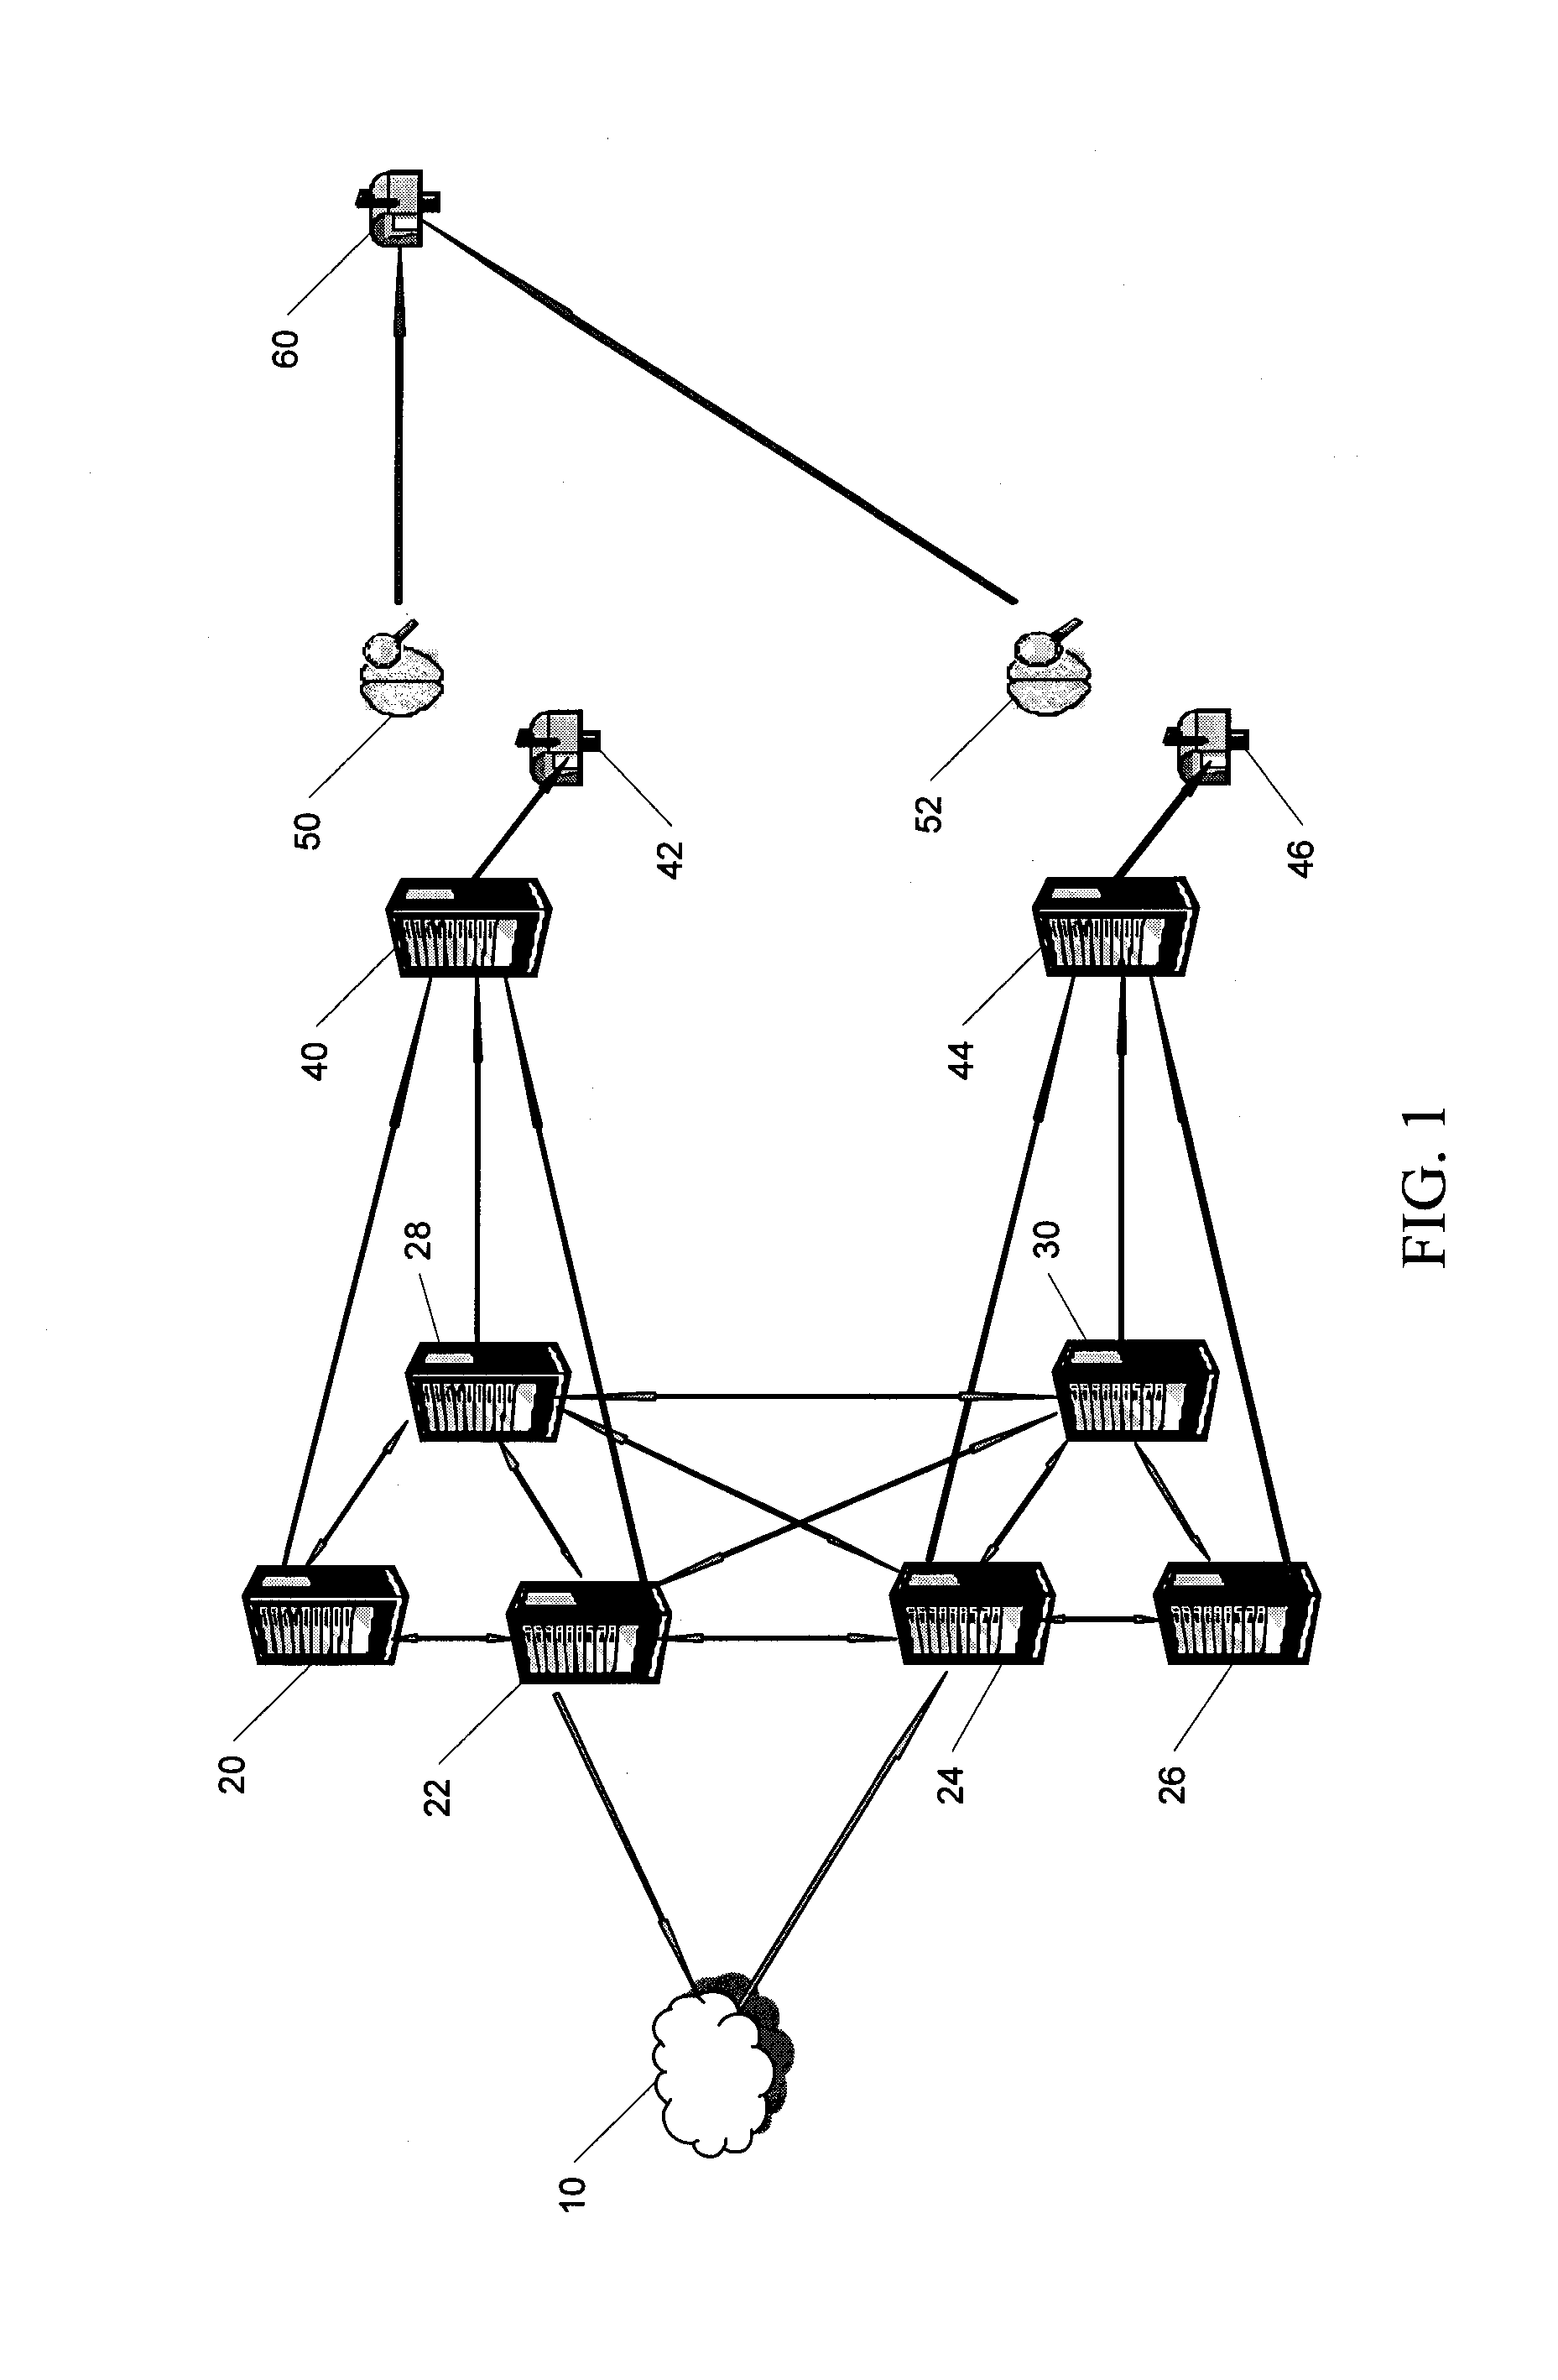 System and method for analyzing and filtering journaled electronic mail